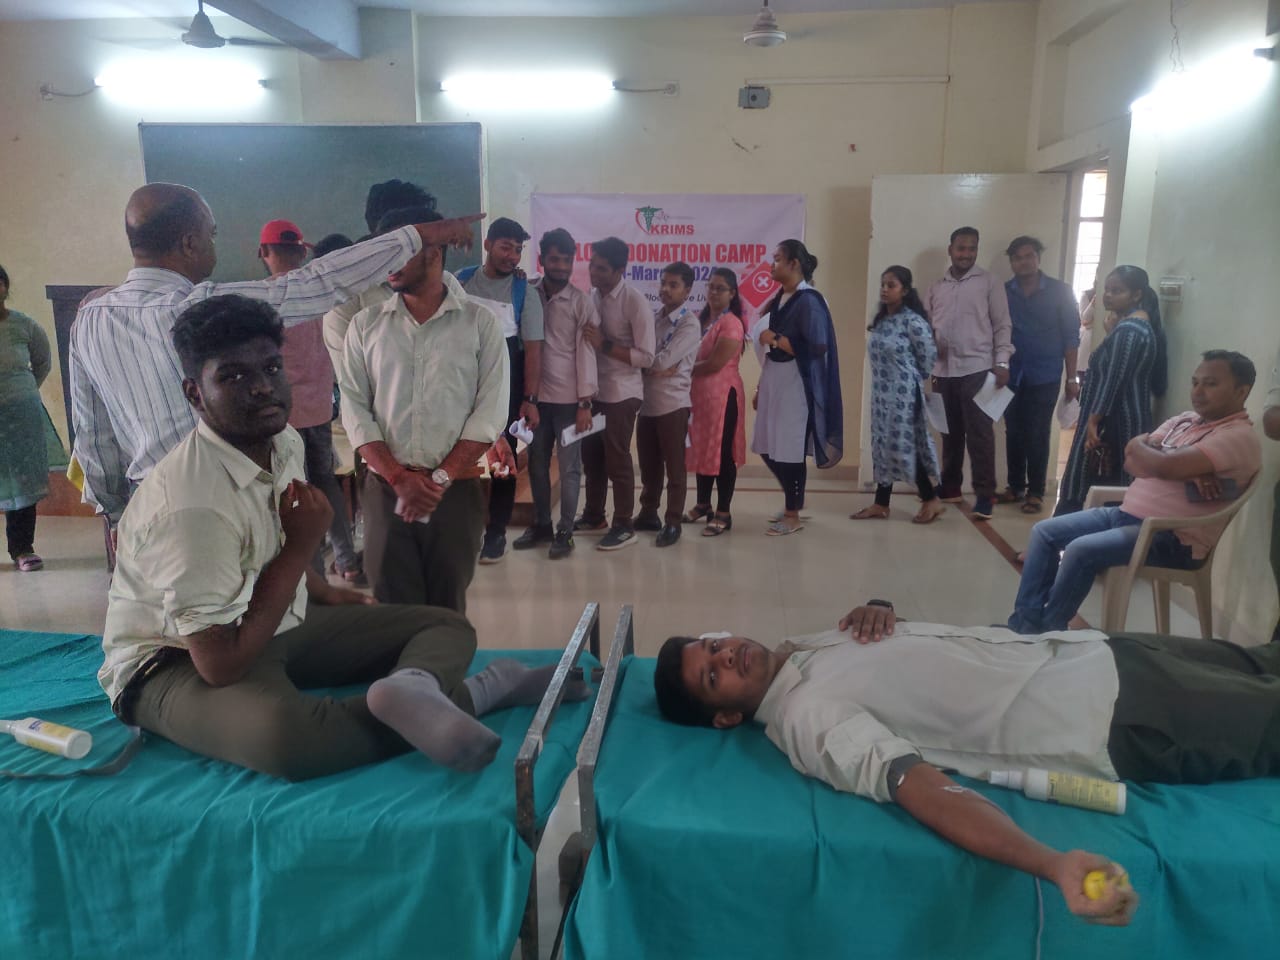 BLOOD DONATION CAMP - 2024